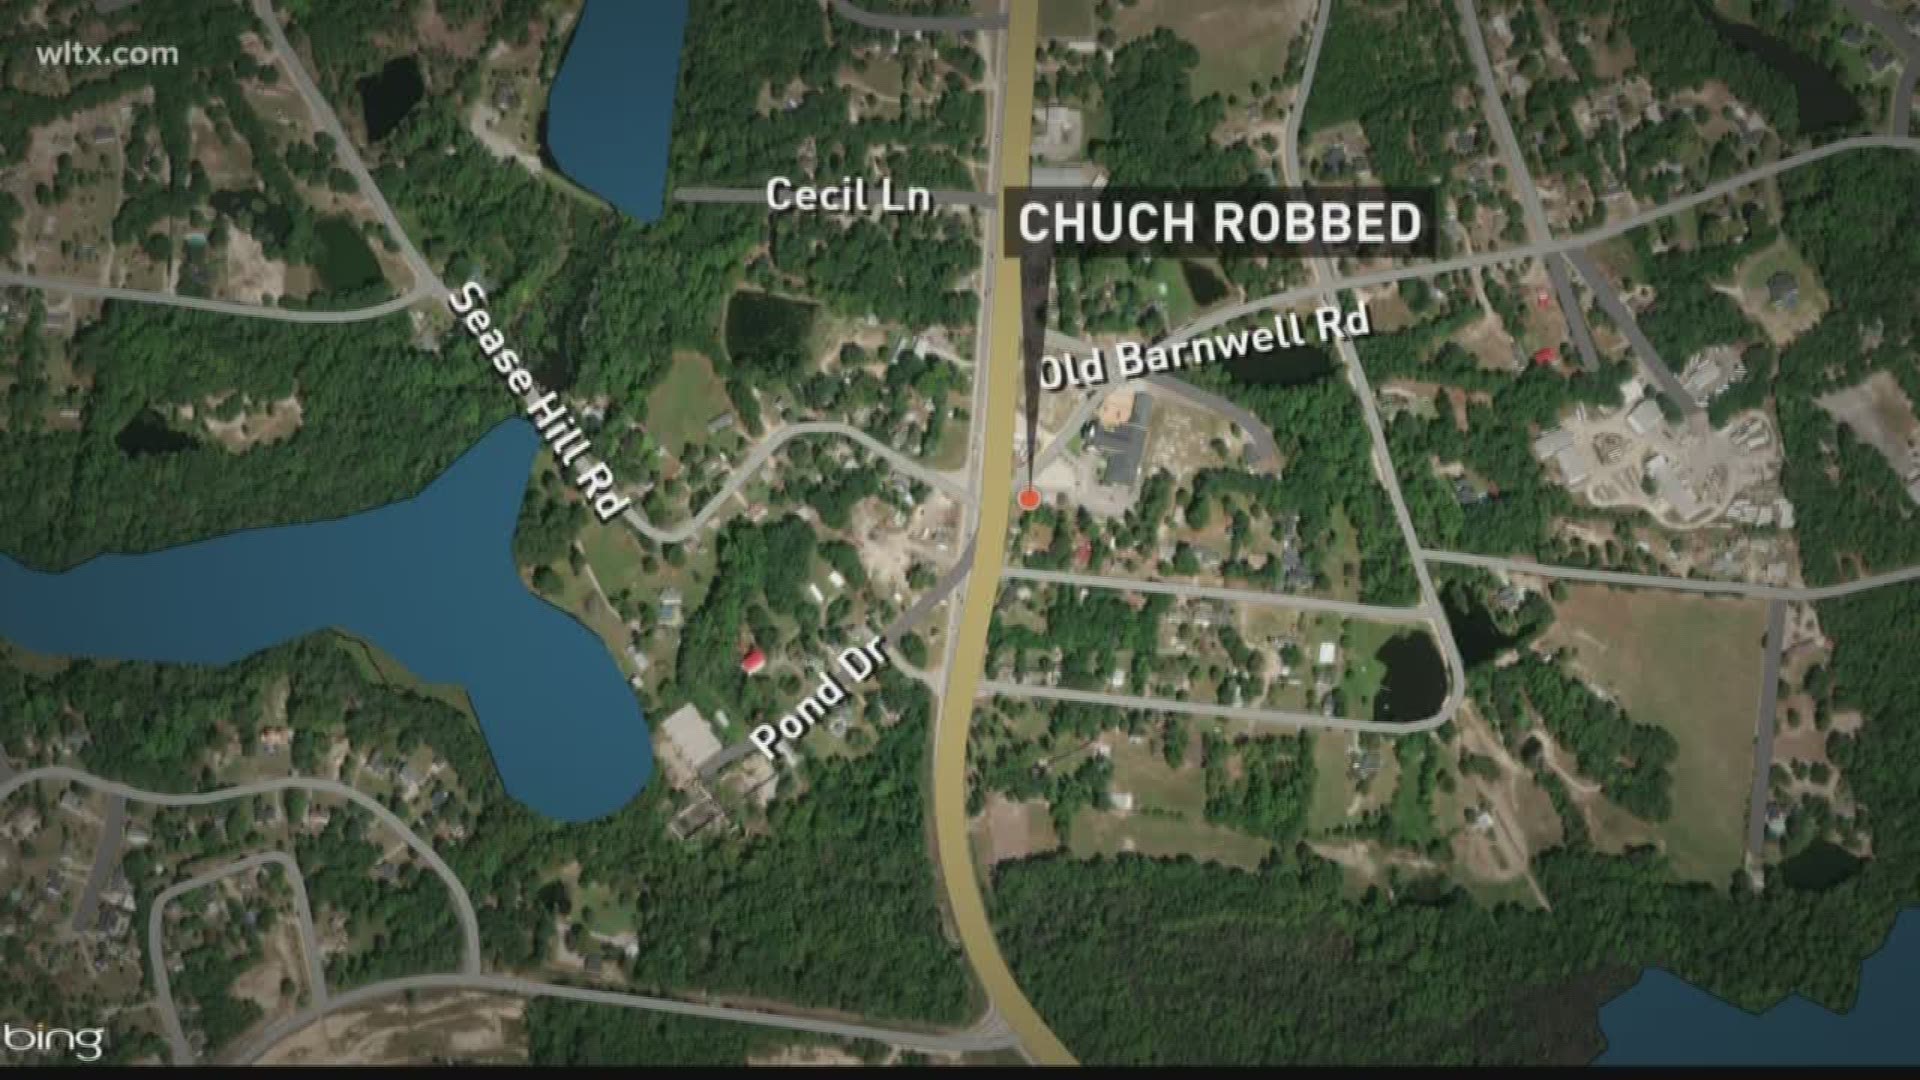 A suspect has been arrested after deputies say he robbed a church Monday morning